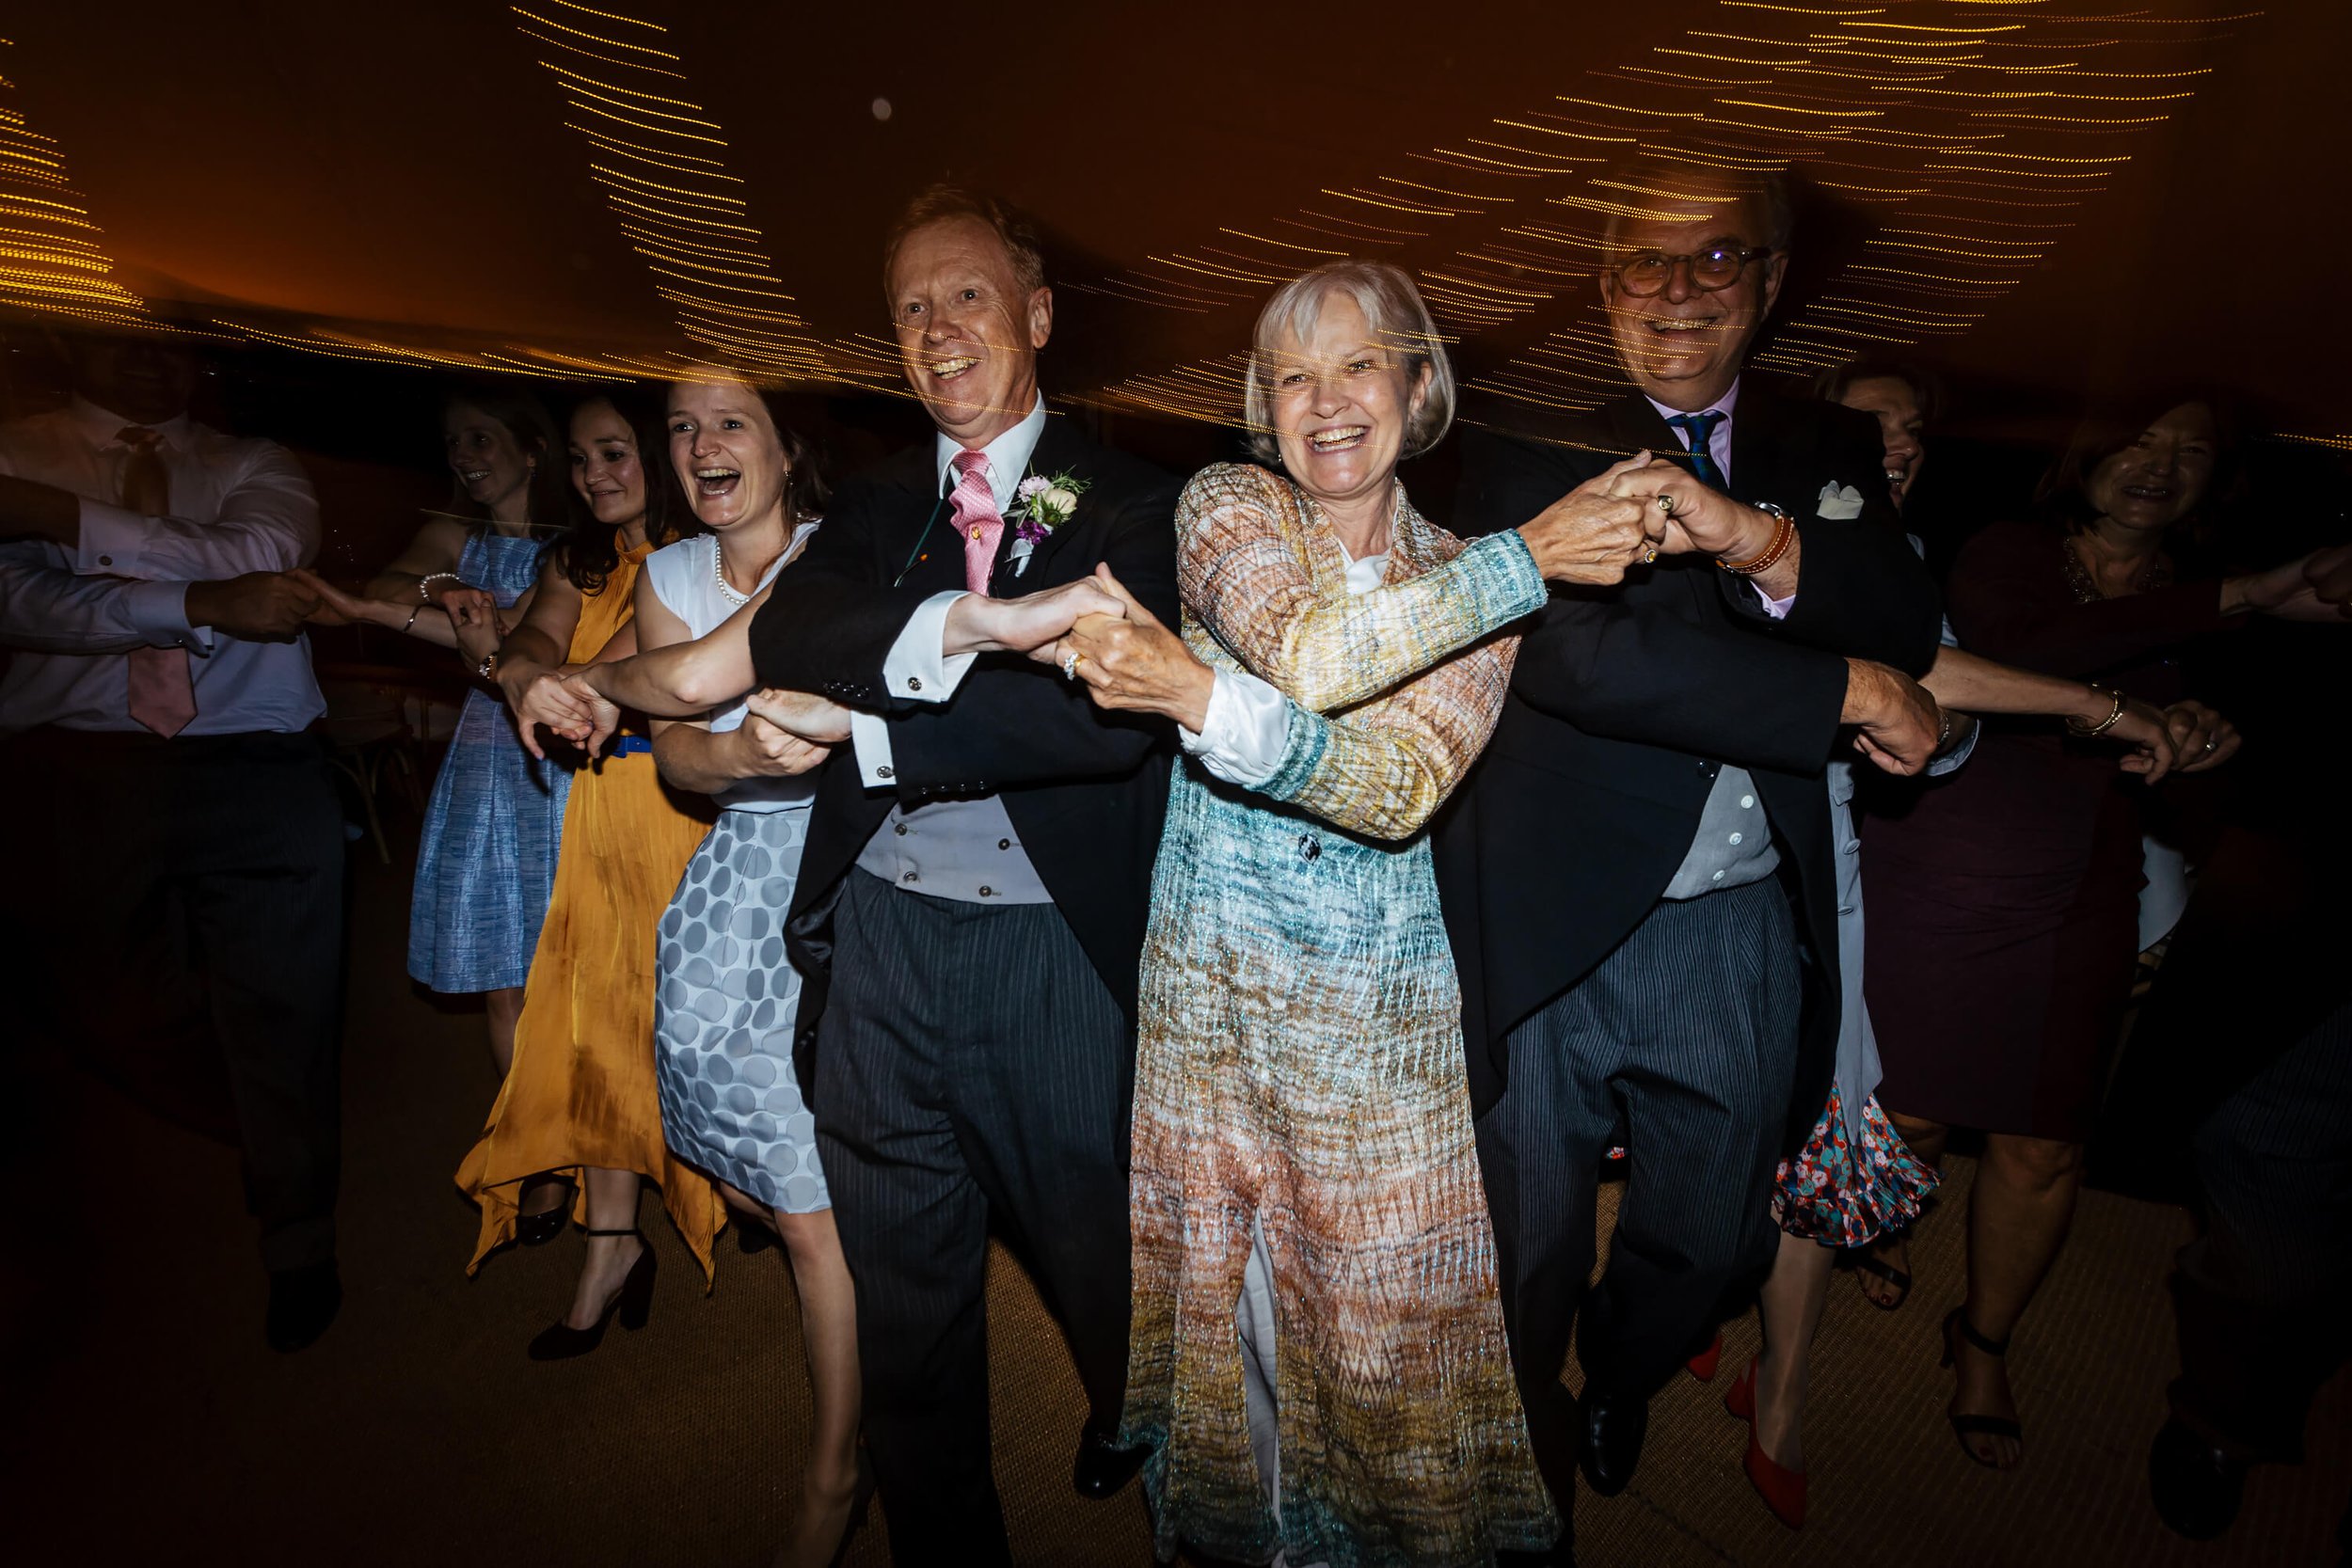 Linking arms on the dance floor at a Burnsall wedding